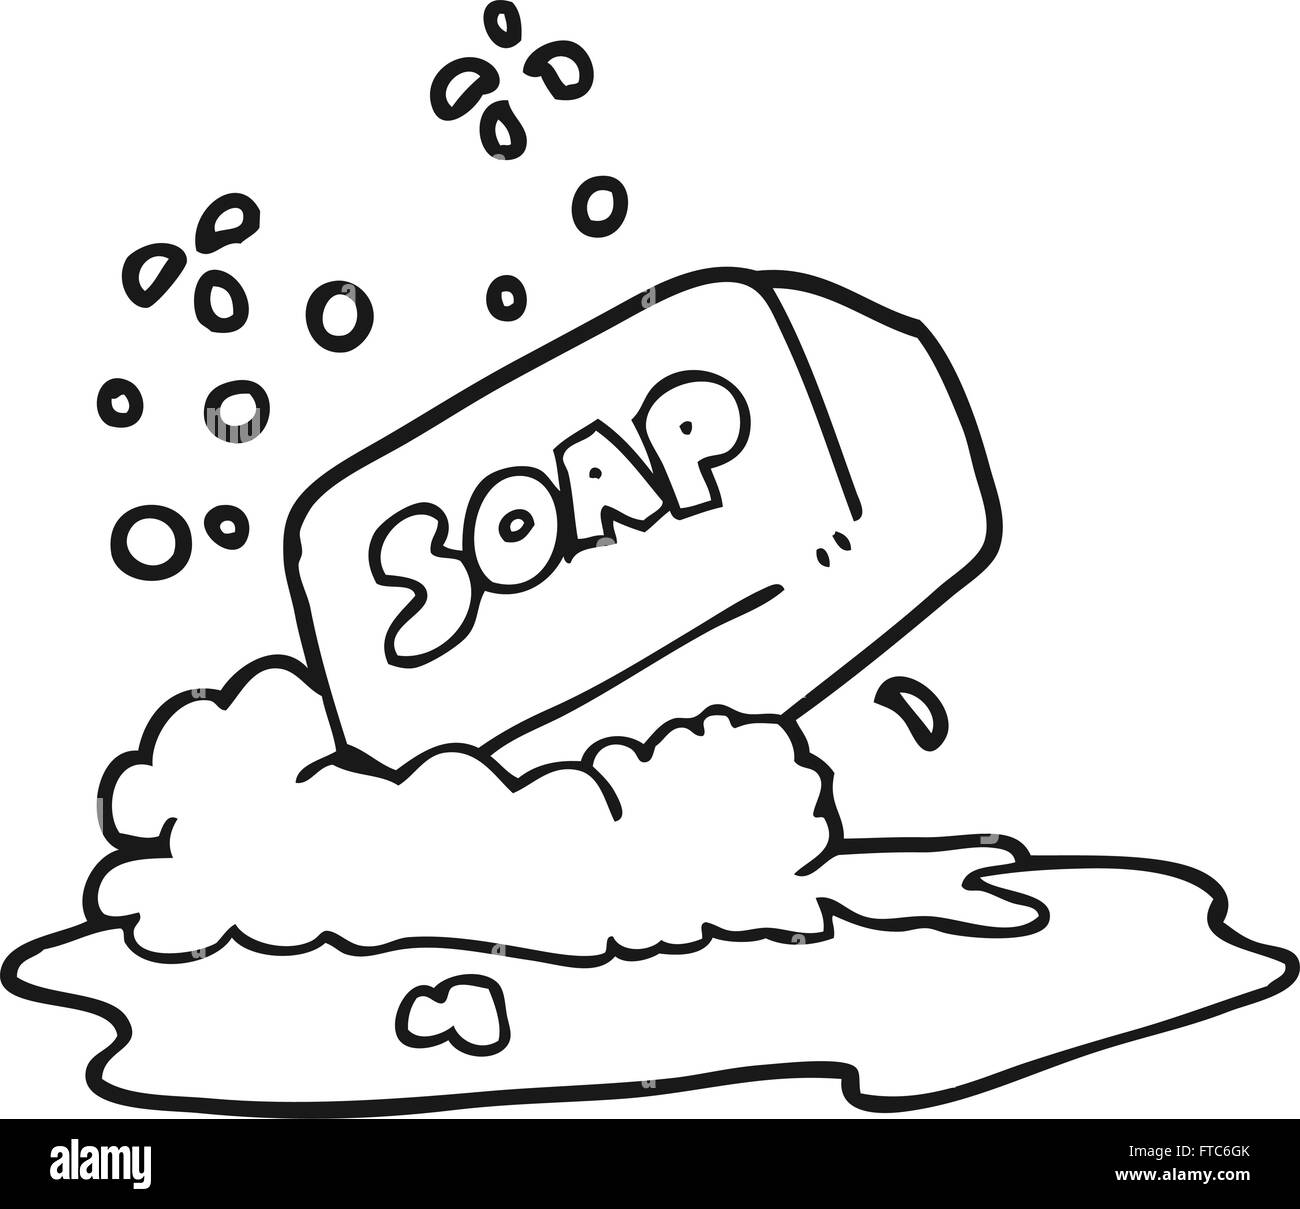 Bar soap Illustrations and Clip Art. 3,385 Bar soap royalty free  illustrations and drawings available to search from thousands of stock  vector EPS clipart graphic designers.